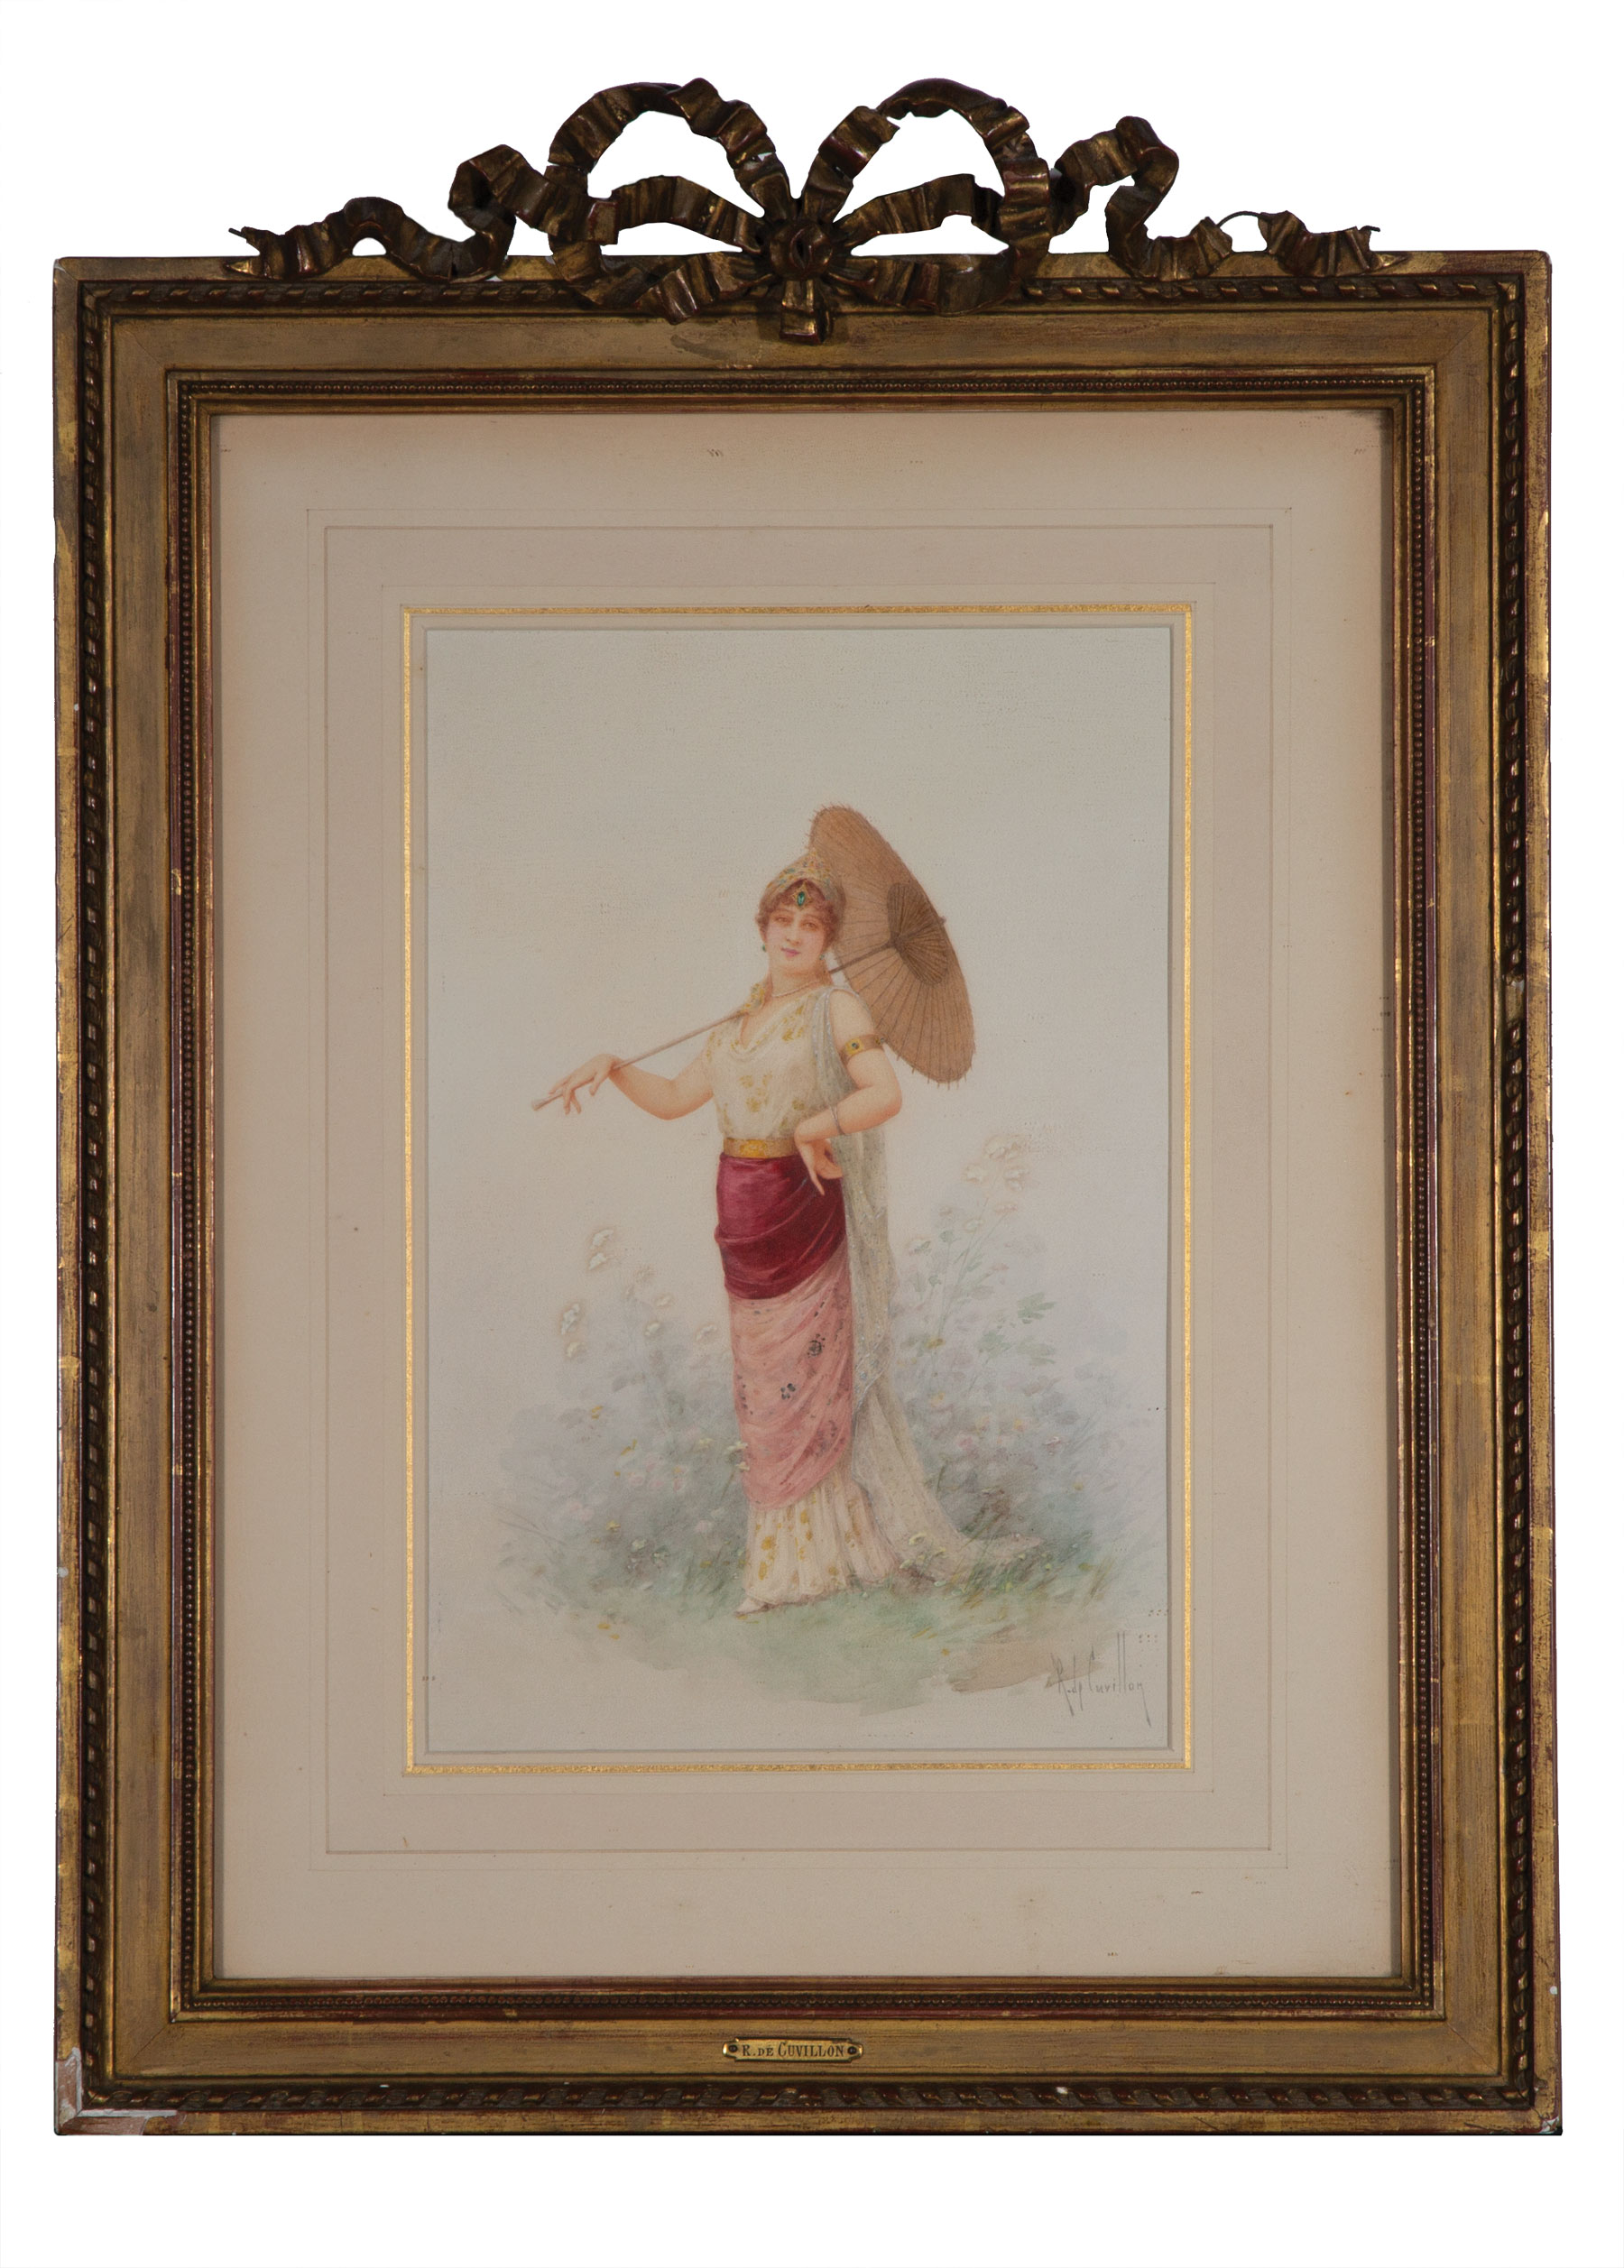 Louis-Robert Cuvillon (French, 1848-1931), "A Persian Belle", watercolor on paper, signed lower